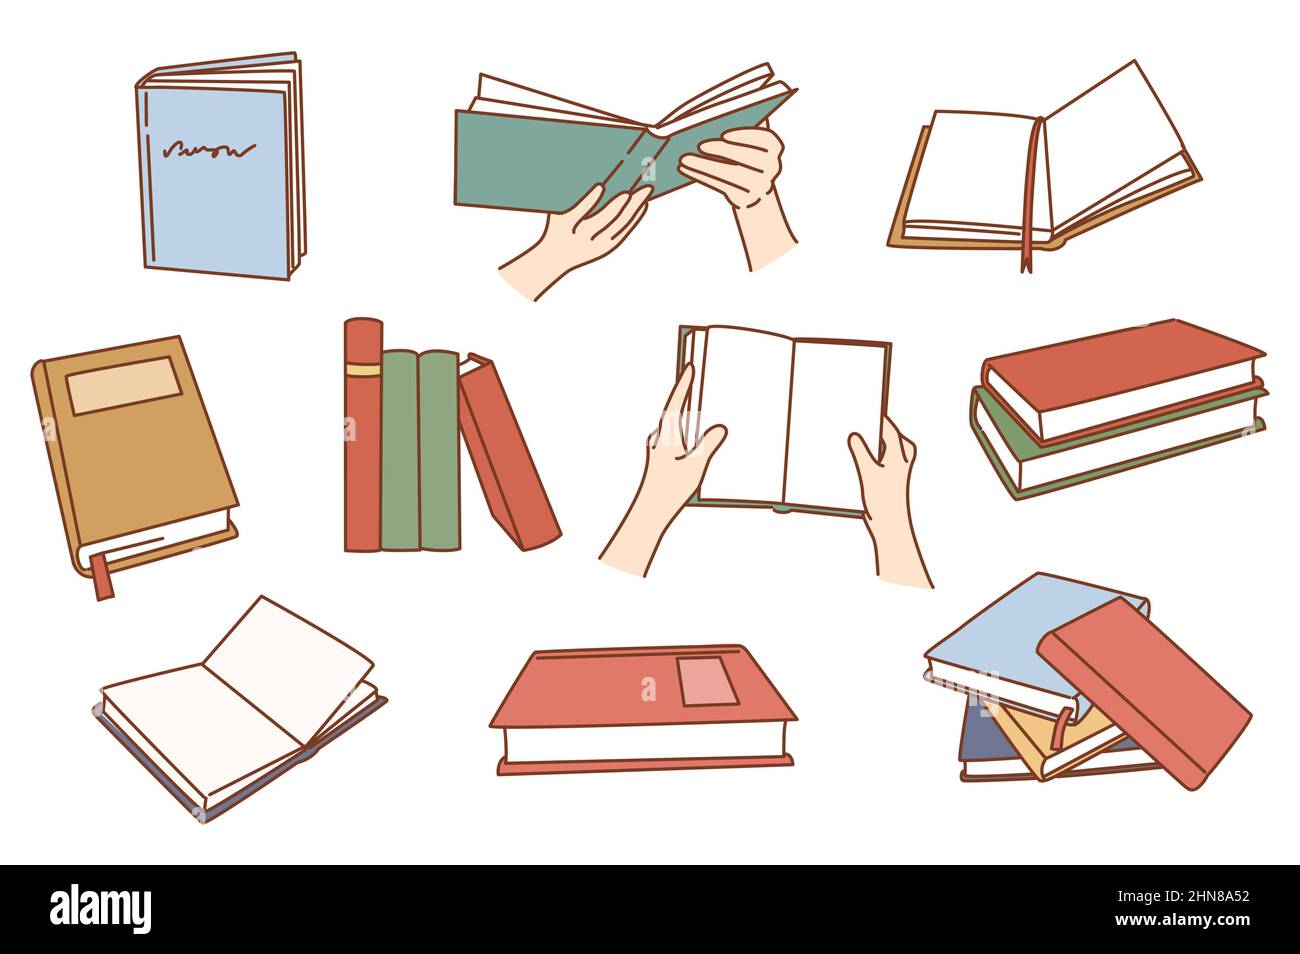 Set of books for school or university studying. Collection of people students read textbooks prepare for exam. Self-education and learning concept. Literature bundle. Flat vector illustration.  Stock Vector